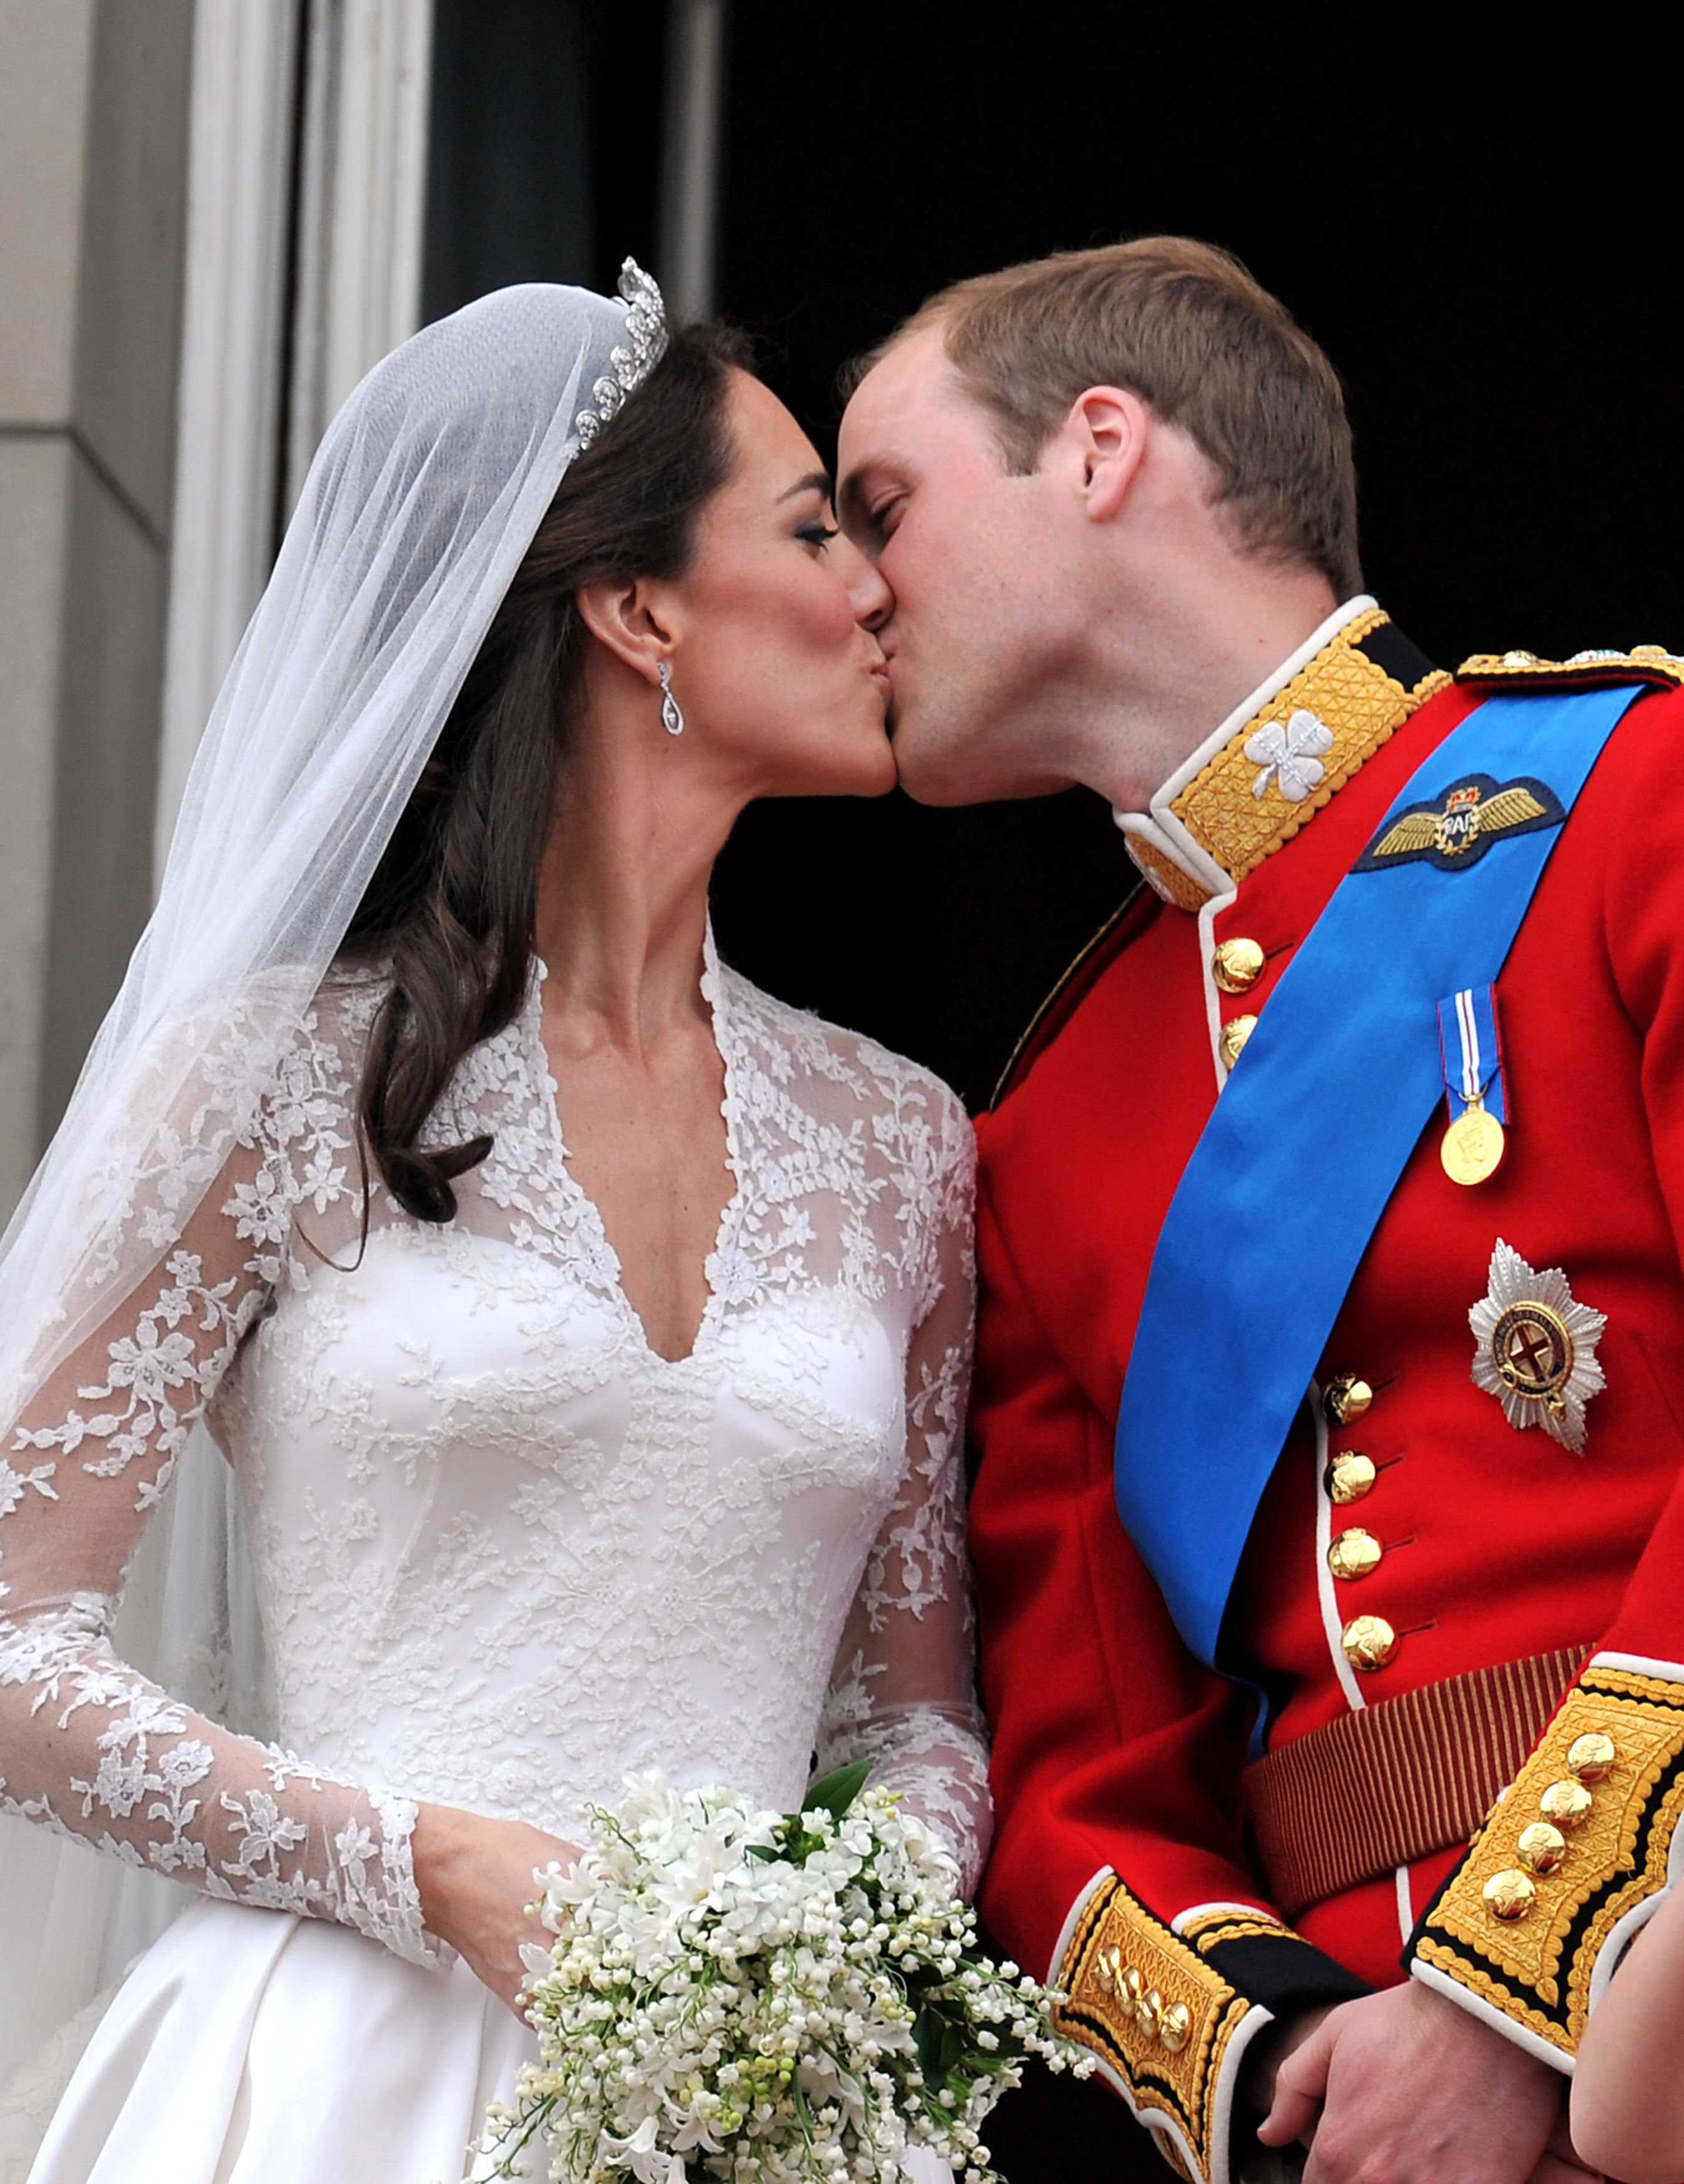 <strong>Prince William wore the Irish Guards uniform to his 2011 wedding&nbsp;</strong>